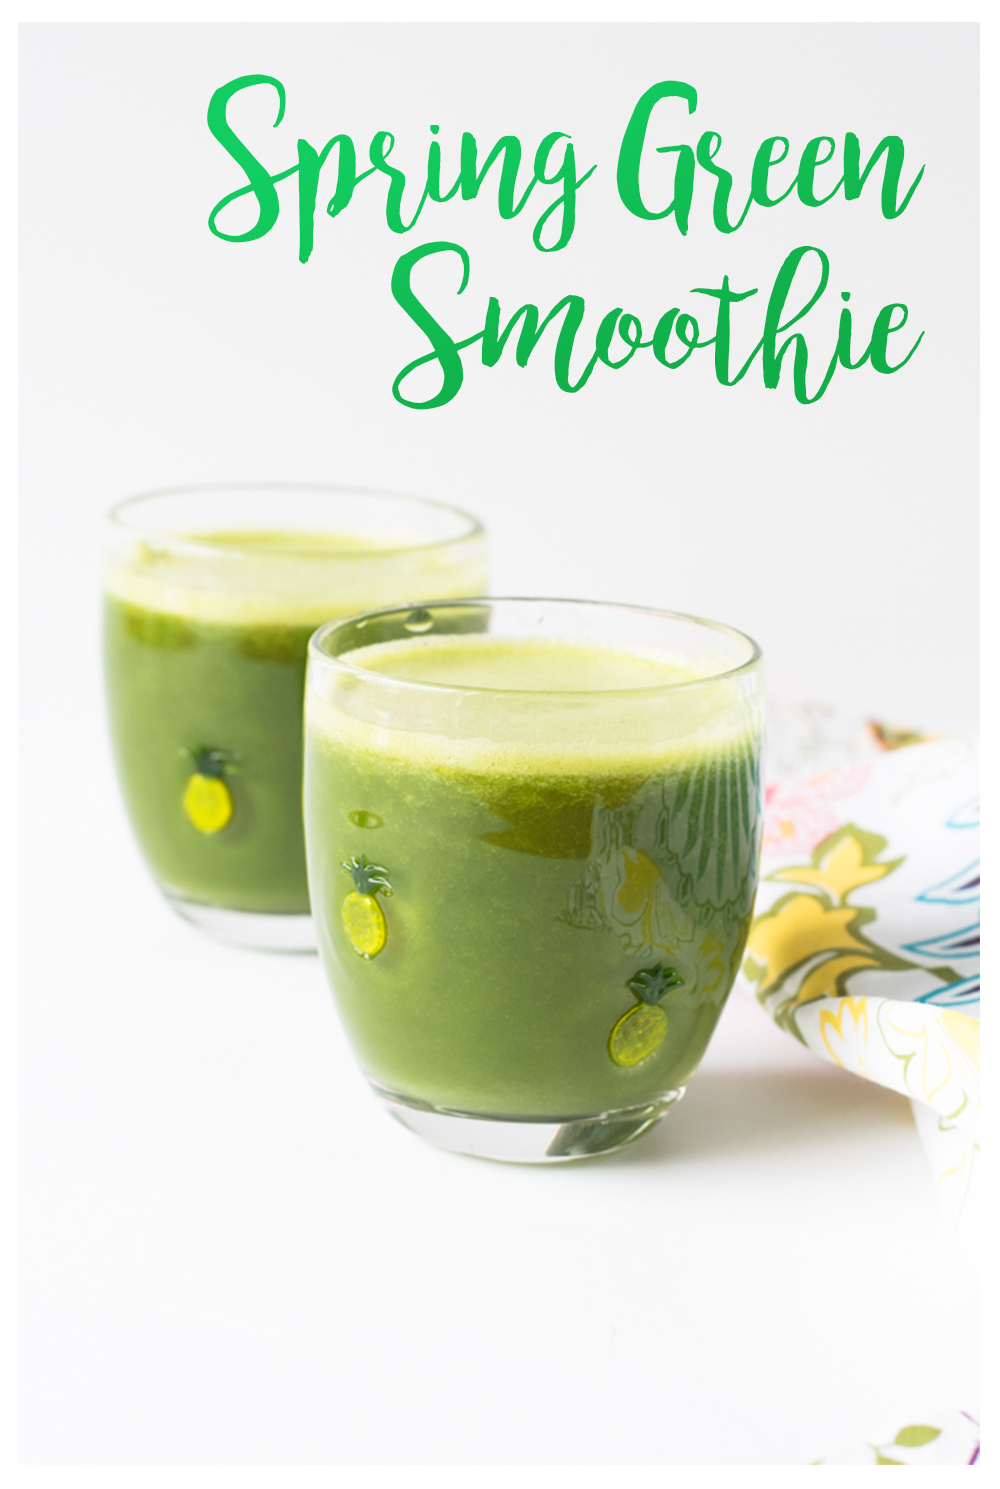 Spring Green Smoothie is the perfect way to start your day. It is full of vitamins plus it's delicious! 